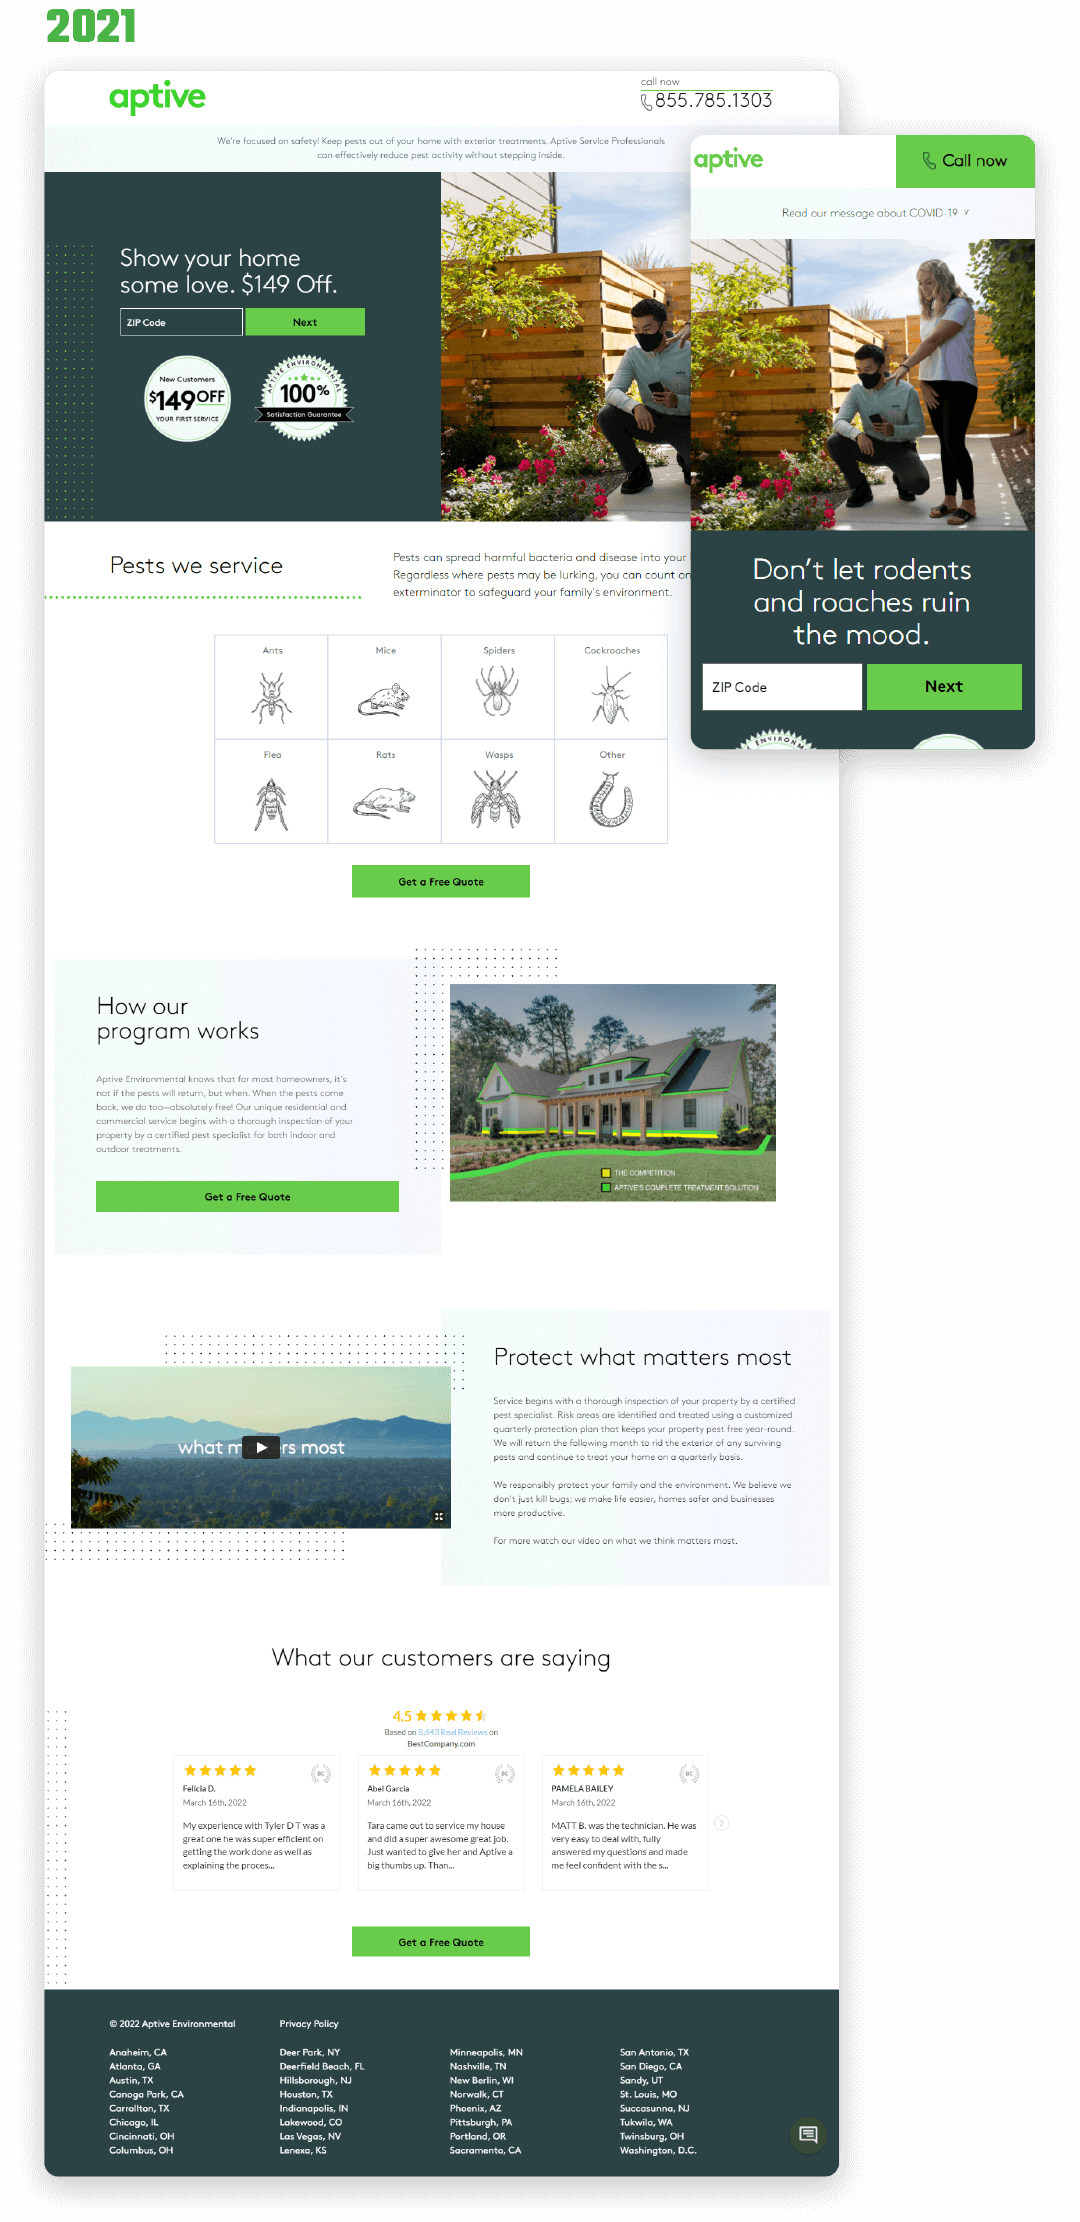 Non-branded landing page from 2021